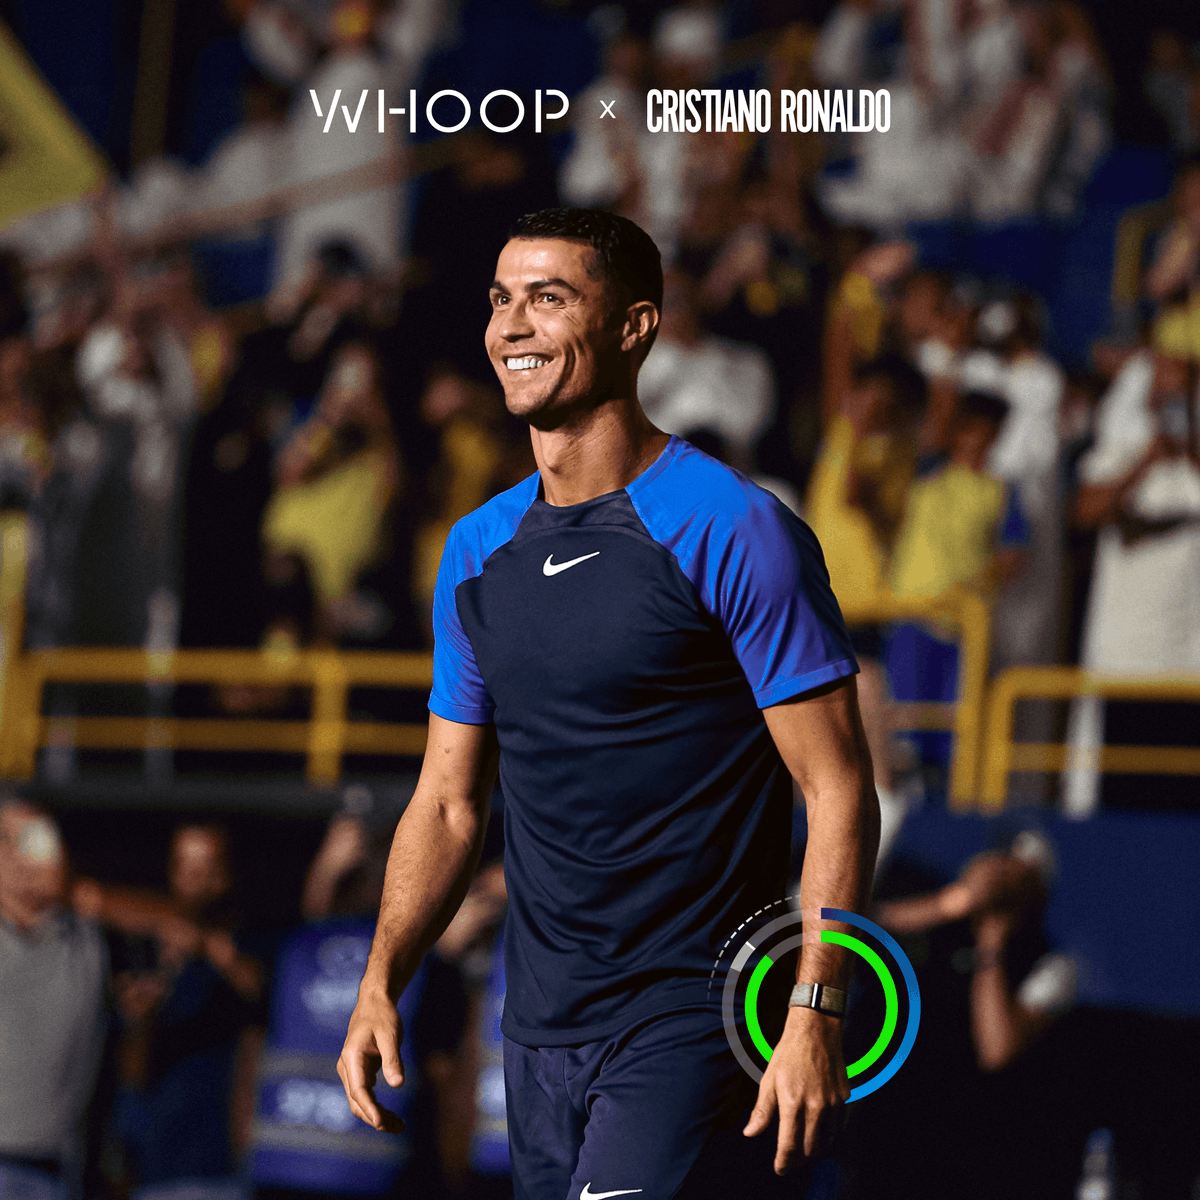 Greatness is the Goal⚽️ Professional footballer Cristiano Ronaldo relies on WHOOP to stay at the top of his game and know his body inside and out. Get yours now - whoop.com/cr7 🙌